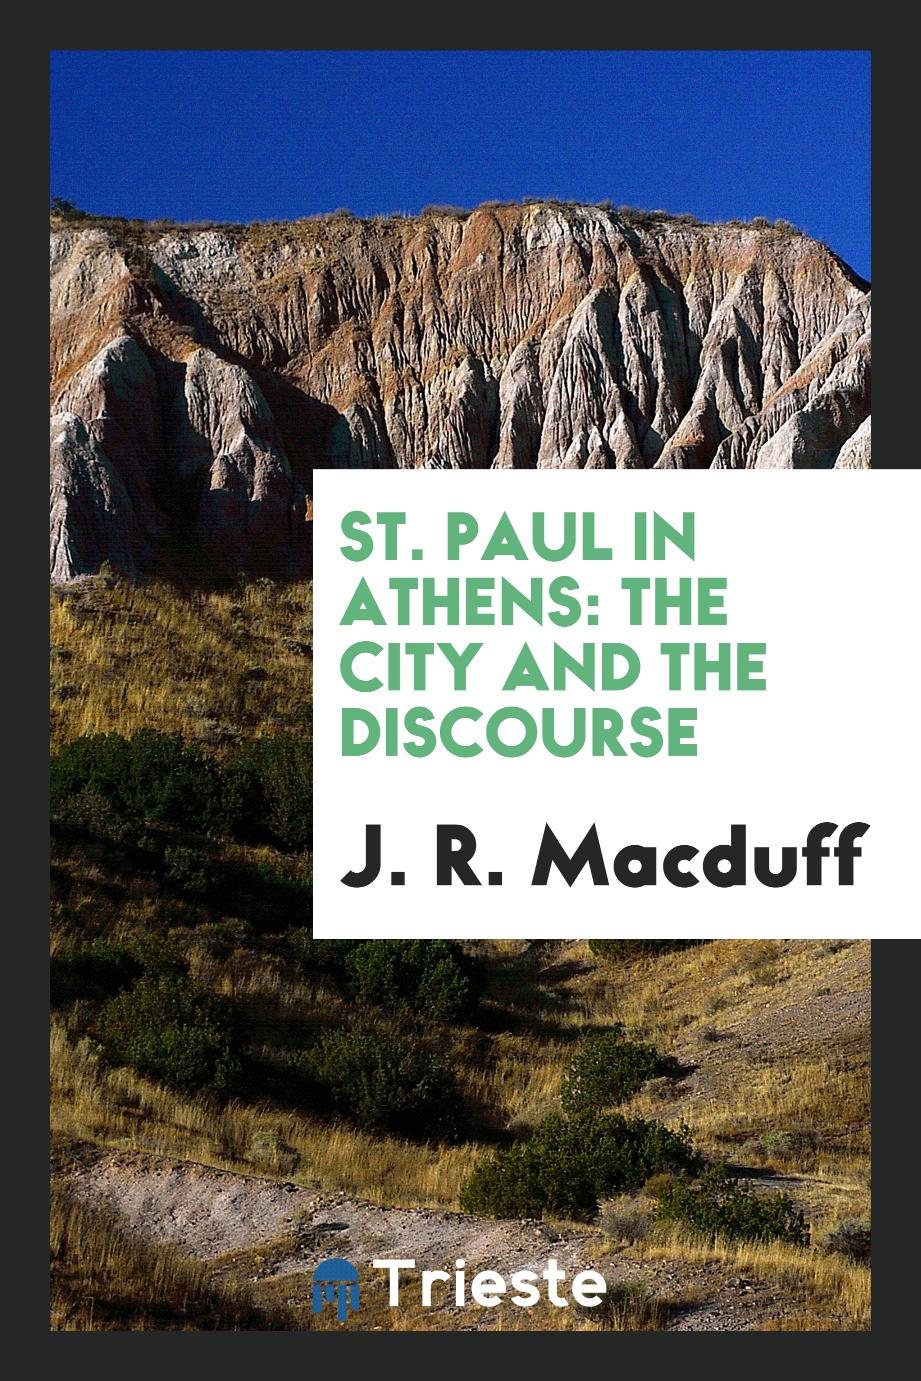 St. Paul in Athens: the city and the discourse